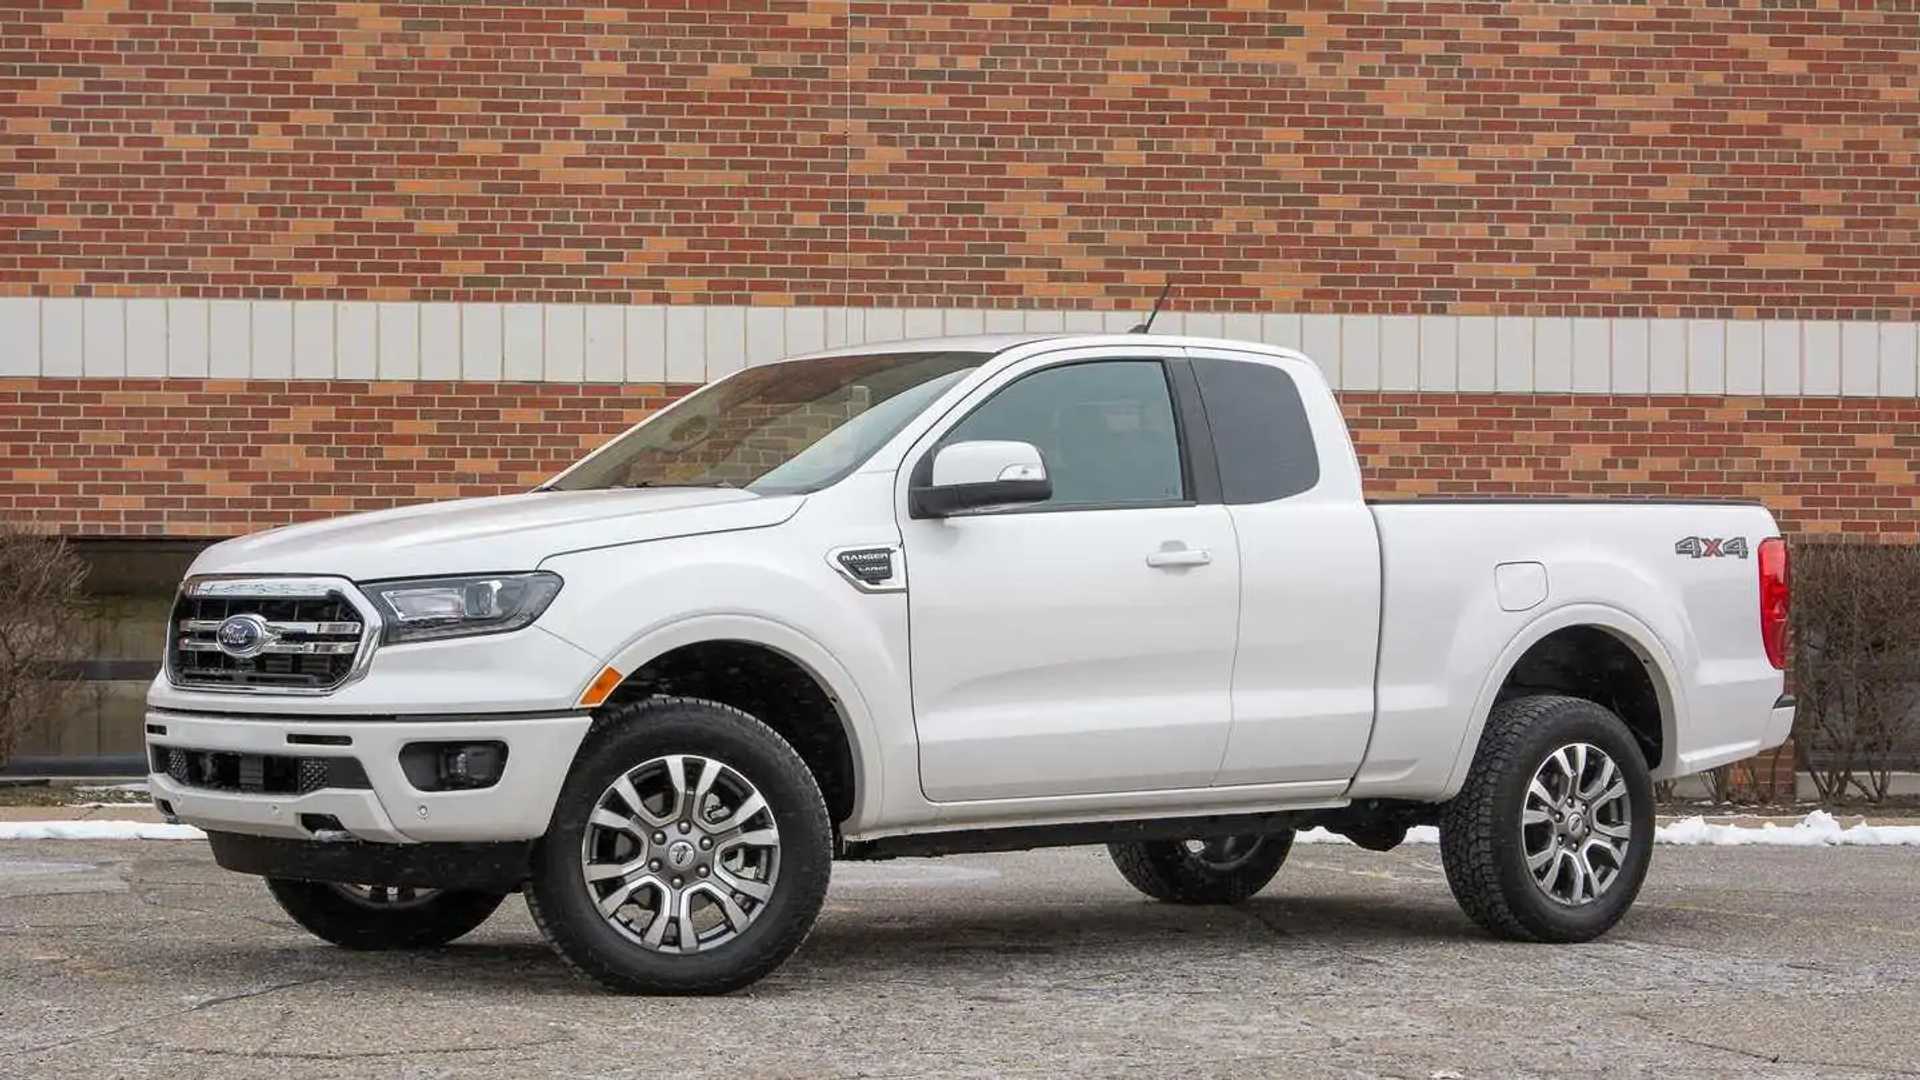 2019 Ford Ranger Lariat Review: Already Approaching Its Expiration Date